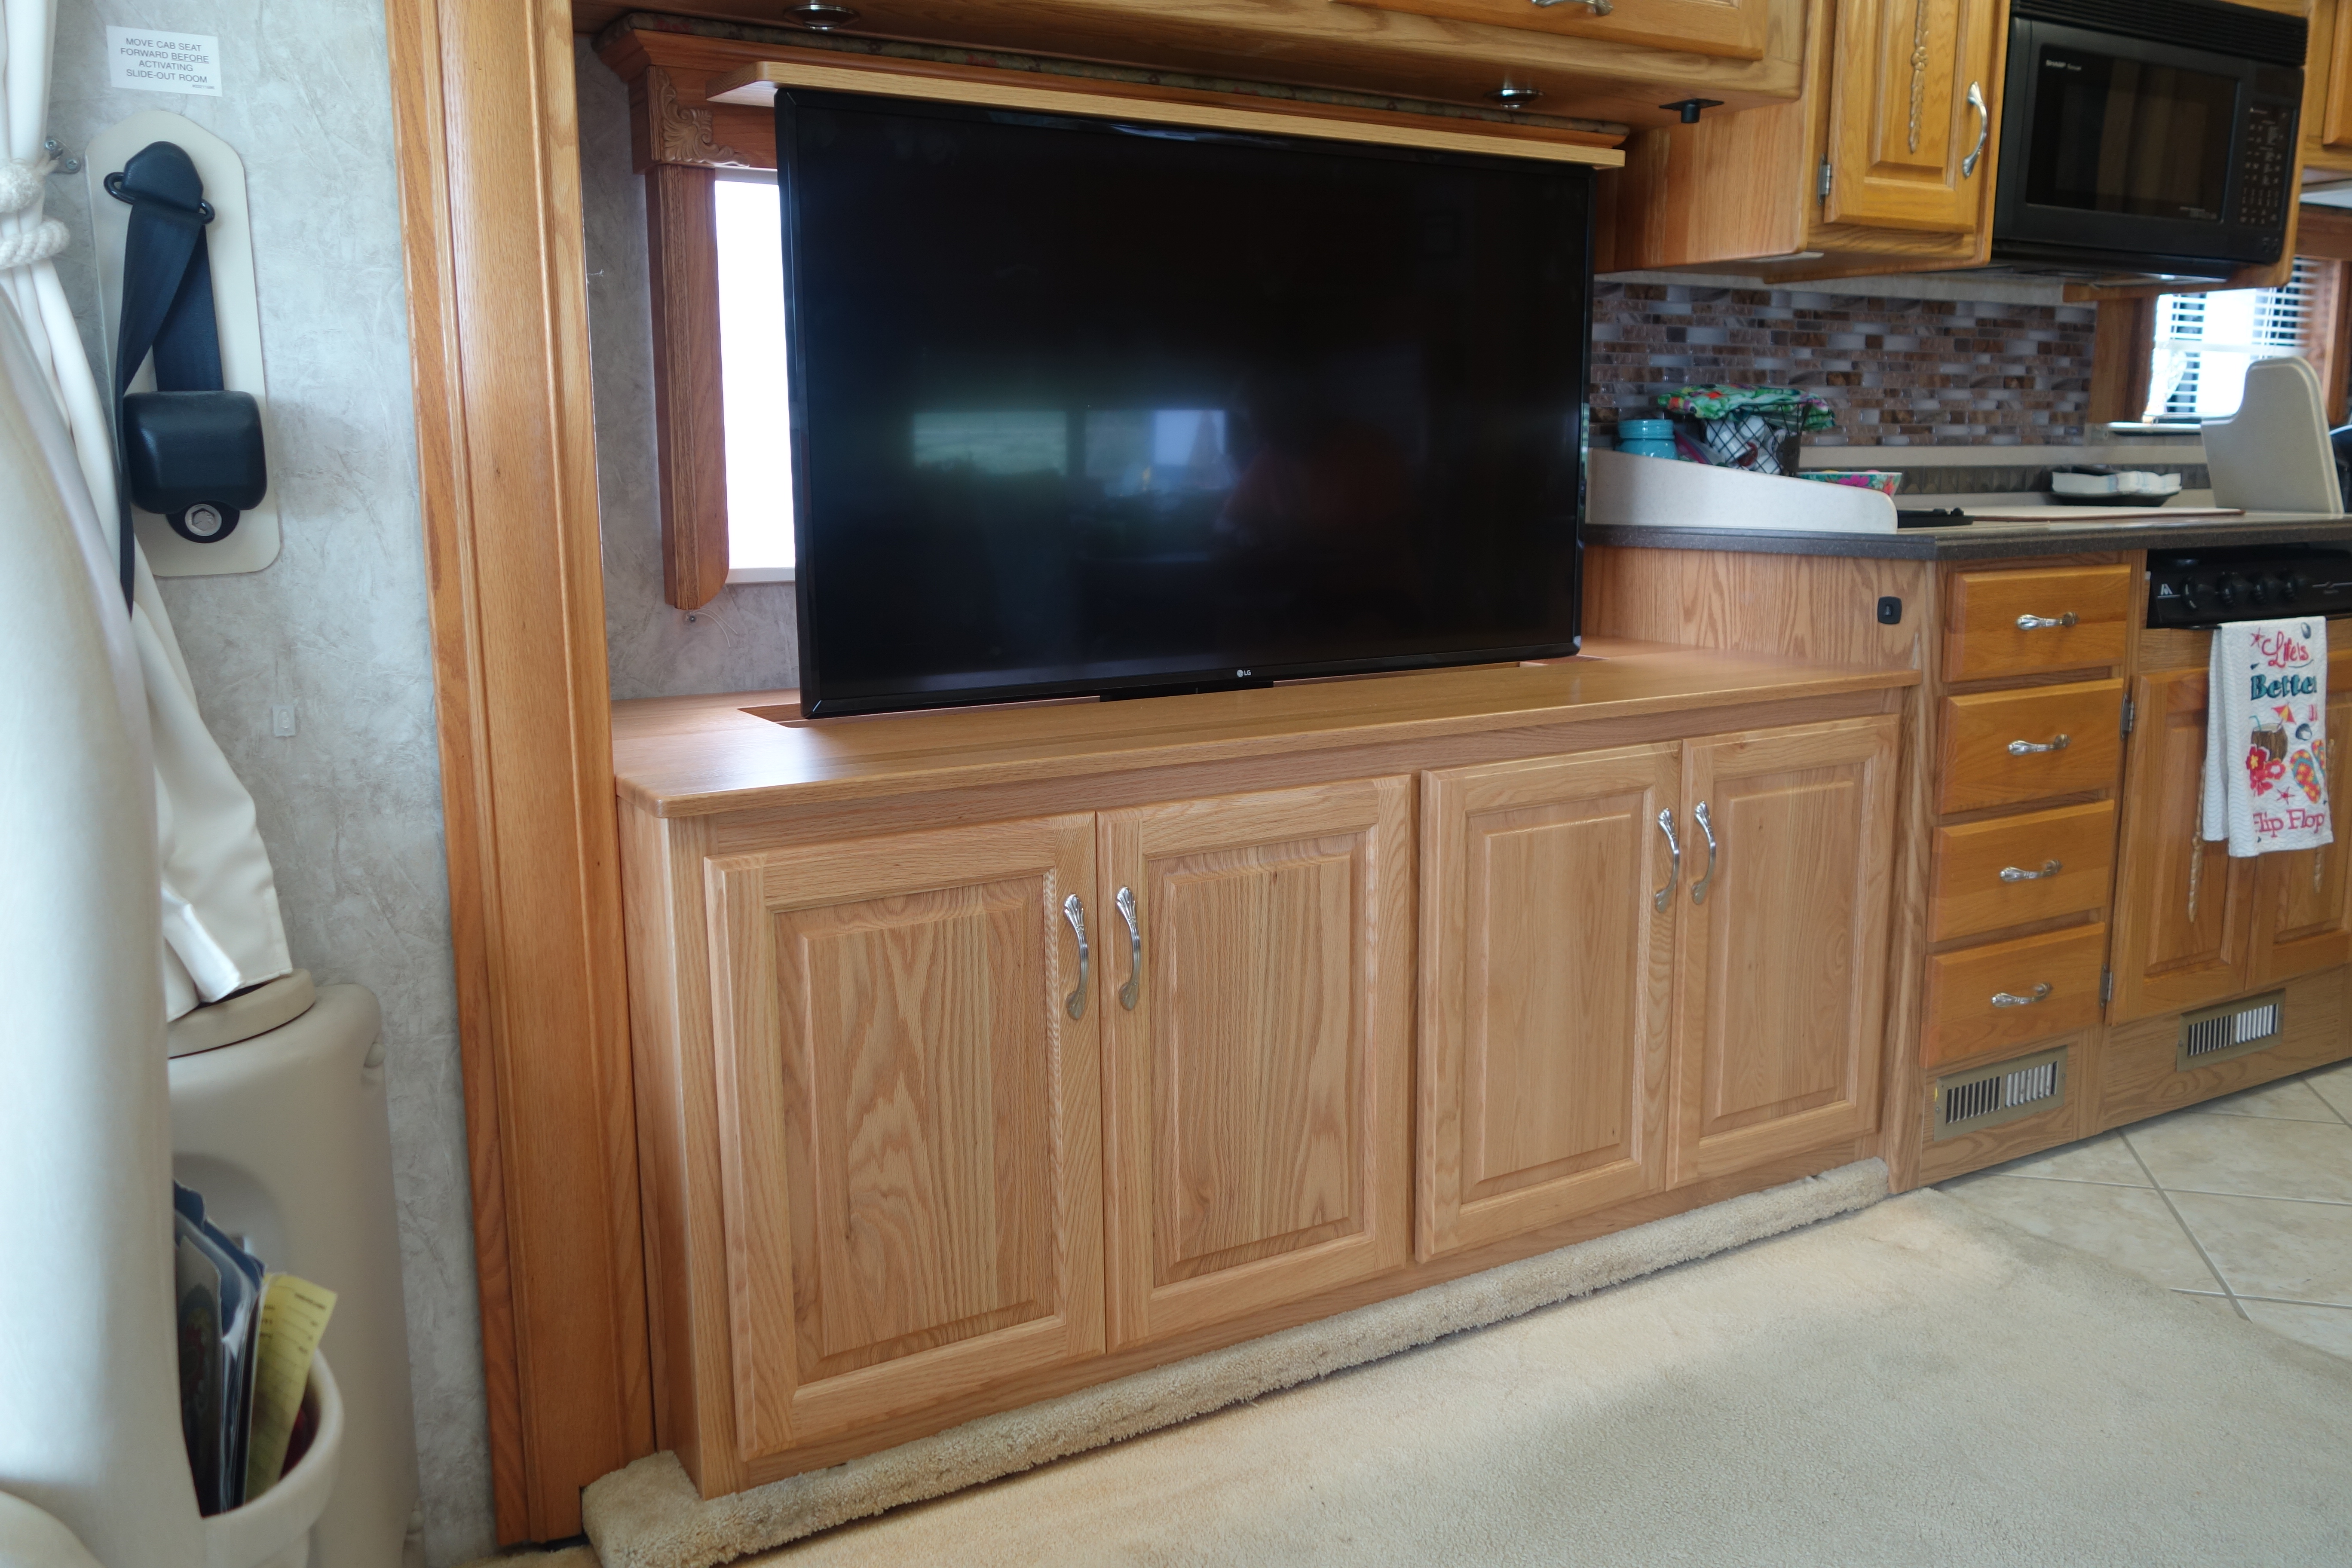 Televator TV cabinet fully lifted by motor